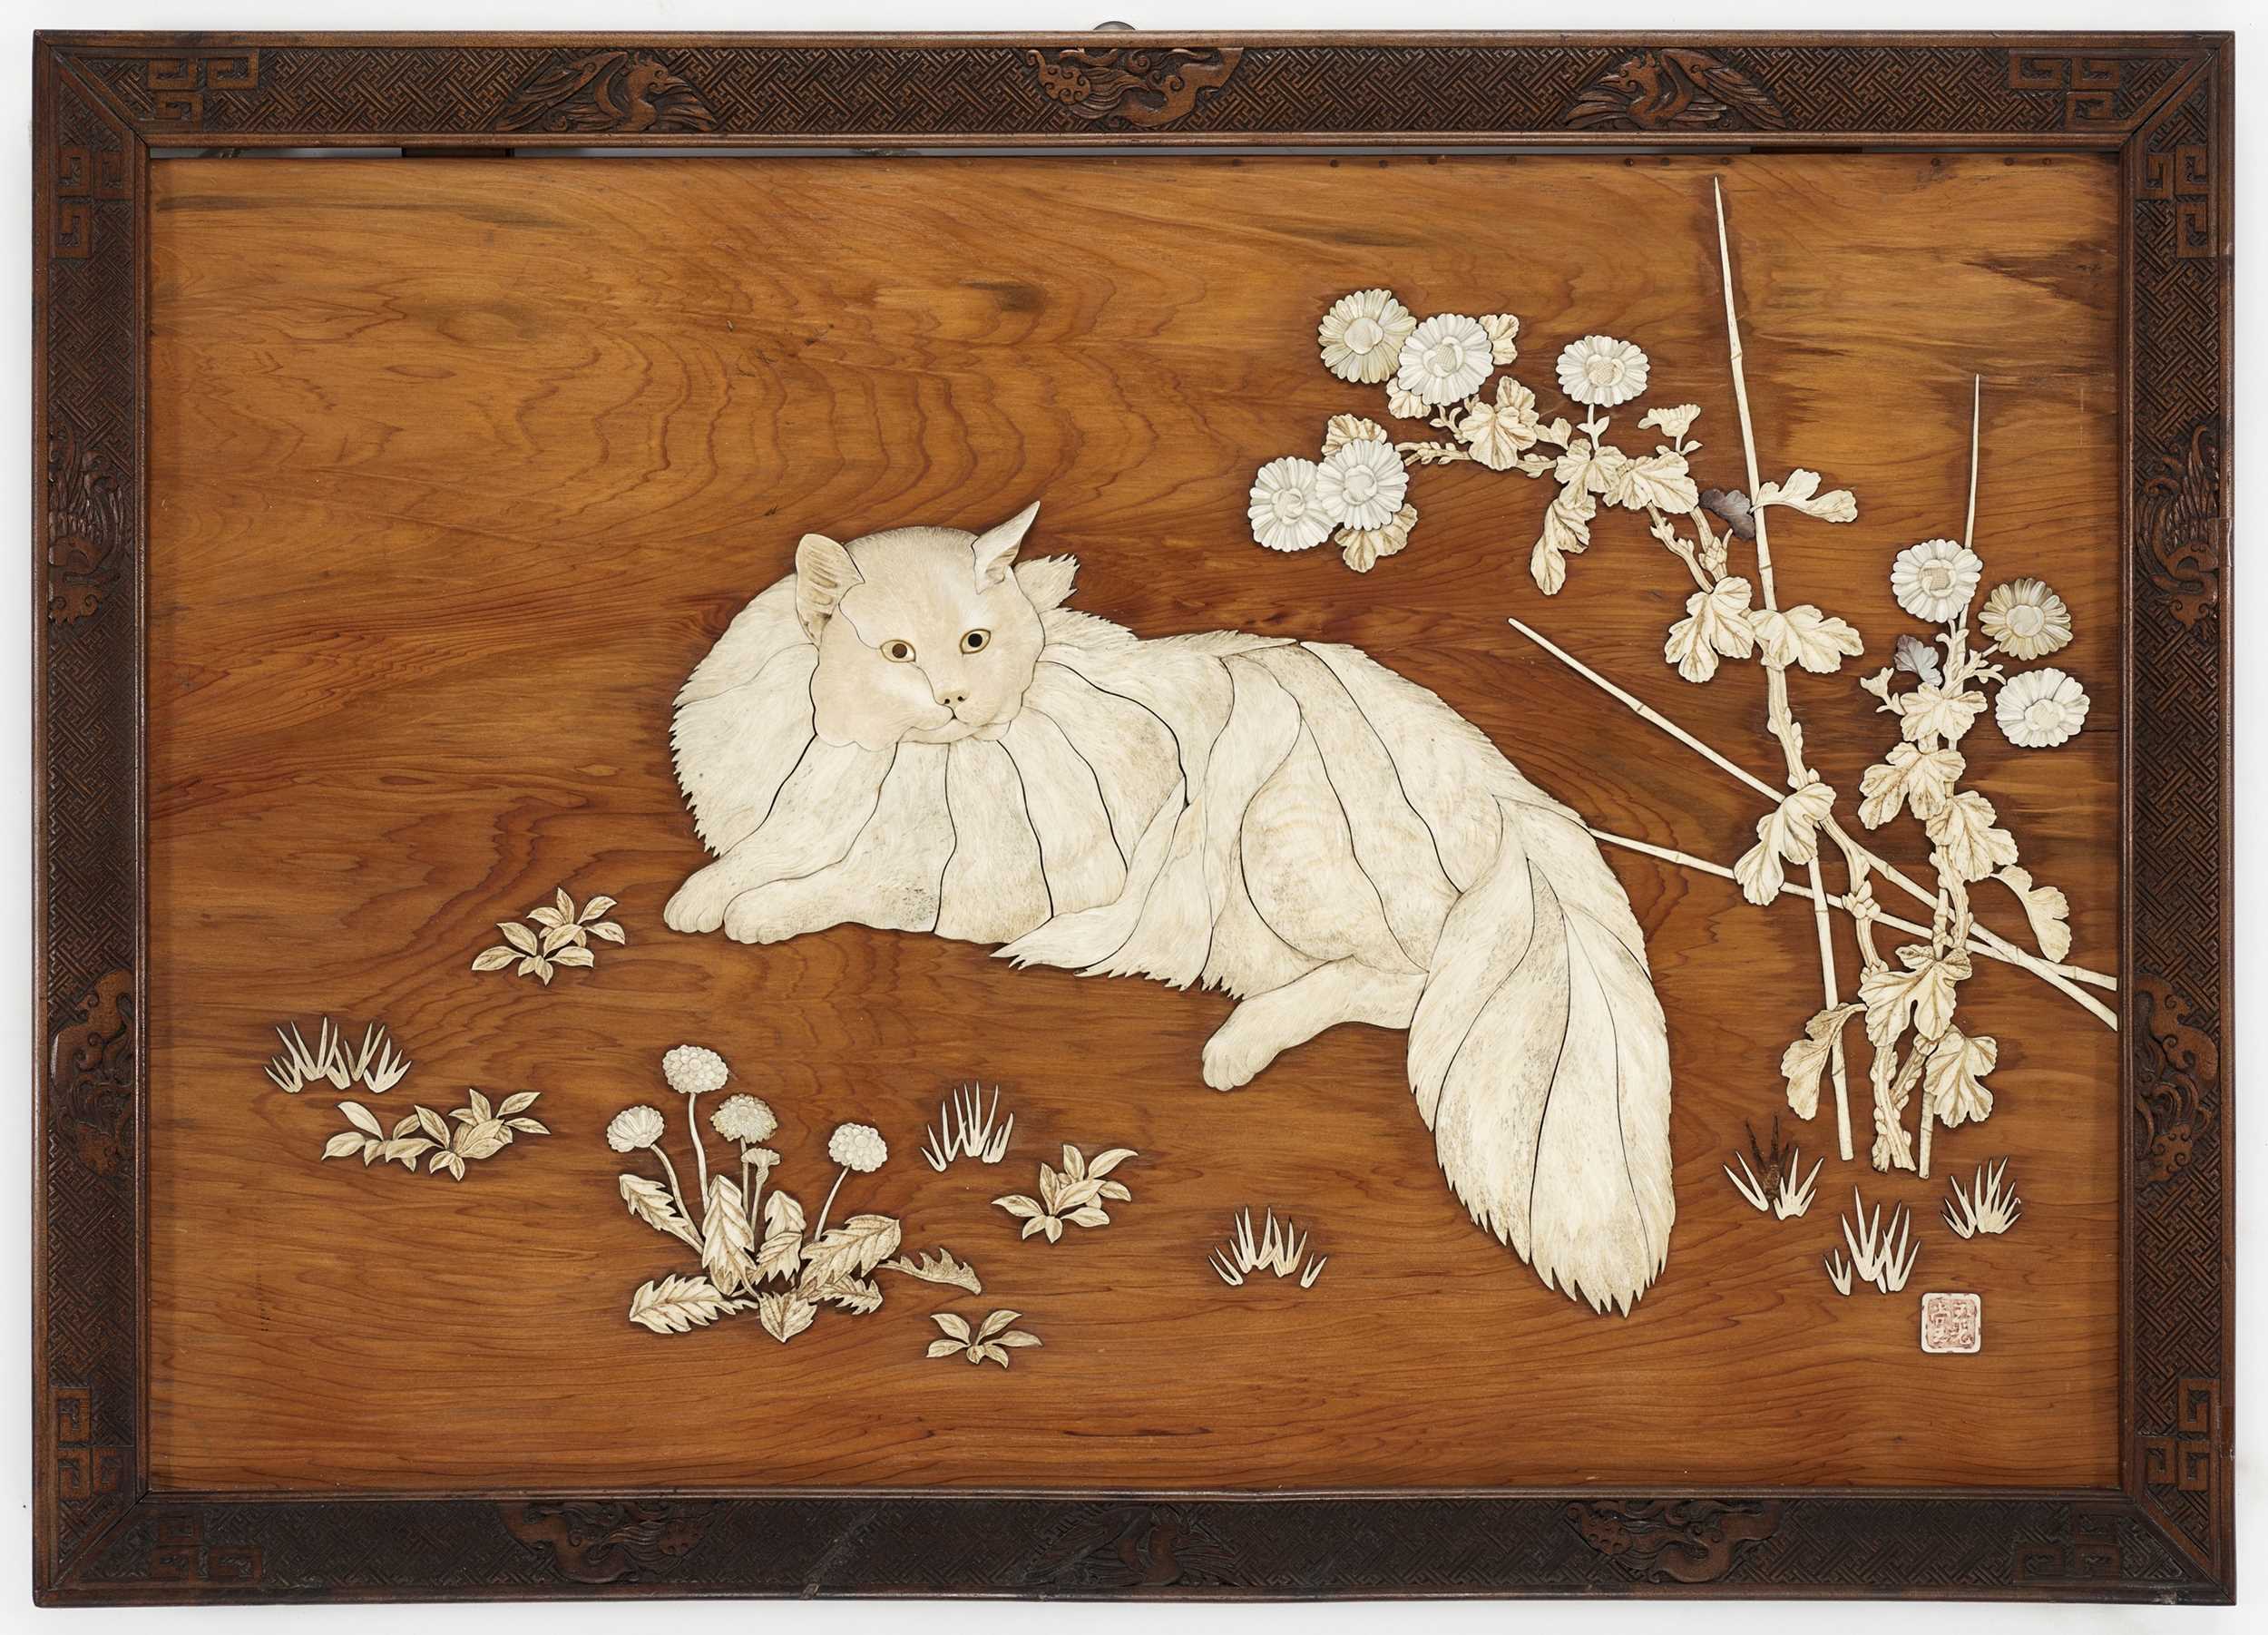 Lot 143 - GYOKKO: AN INLAID WOOD PANEL DEPICTING A CAT AND FLOWERS